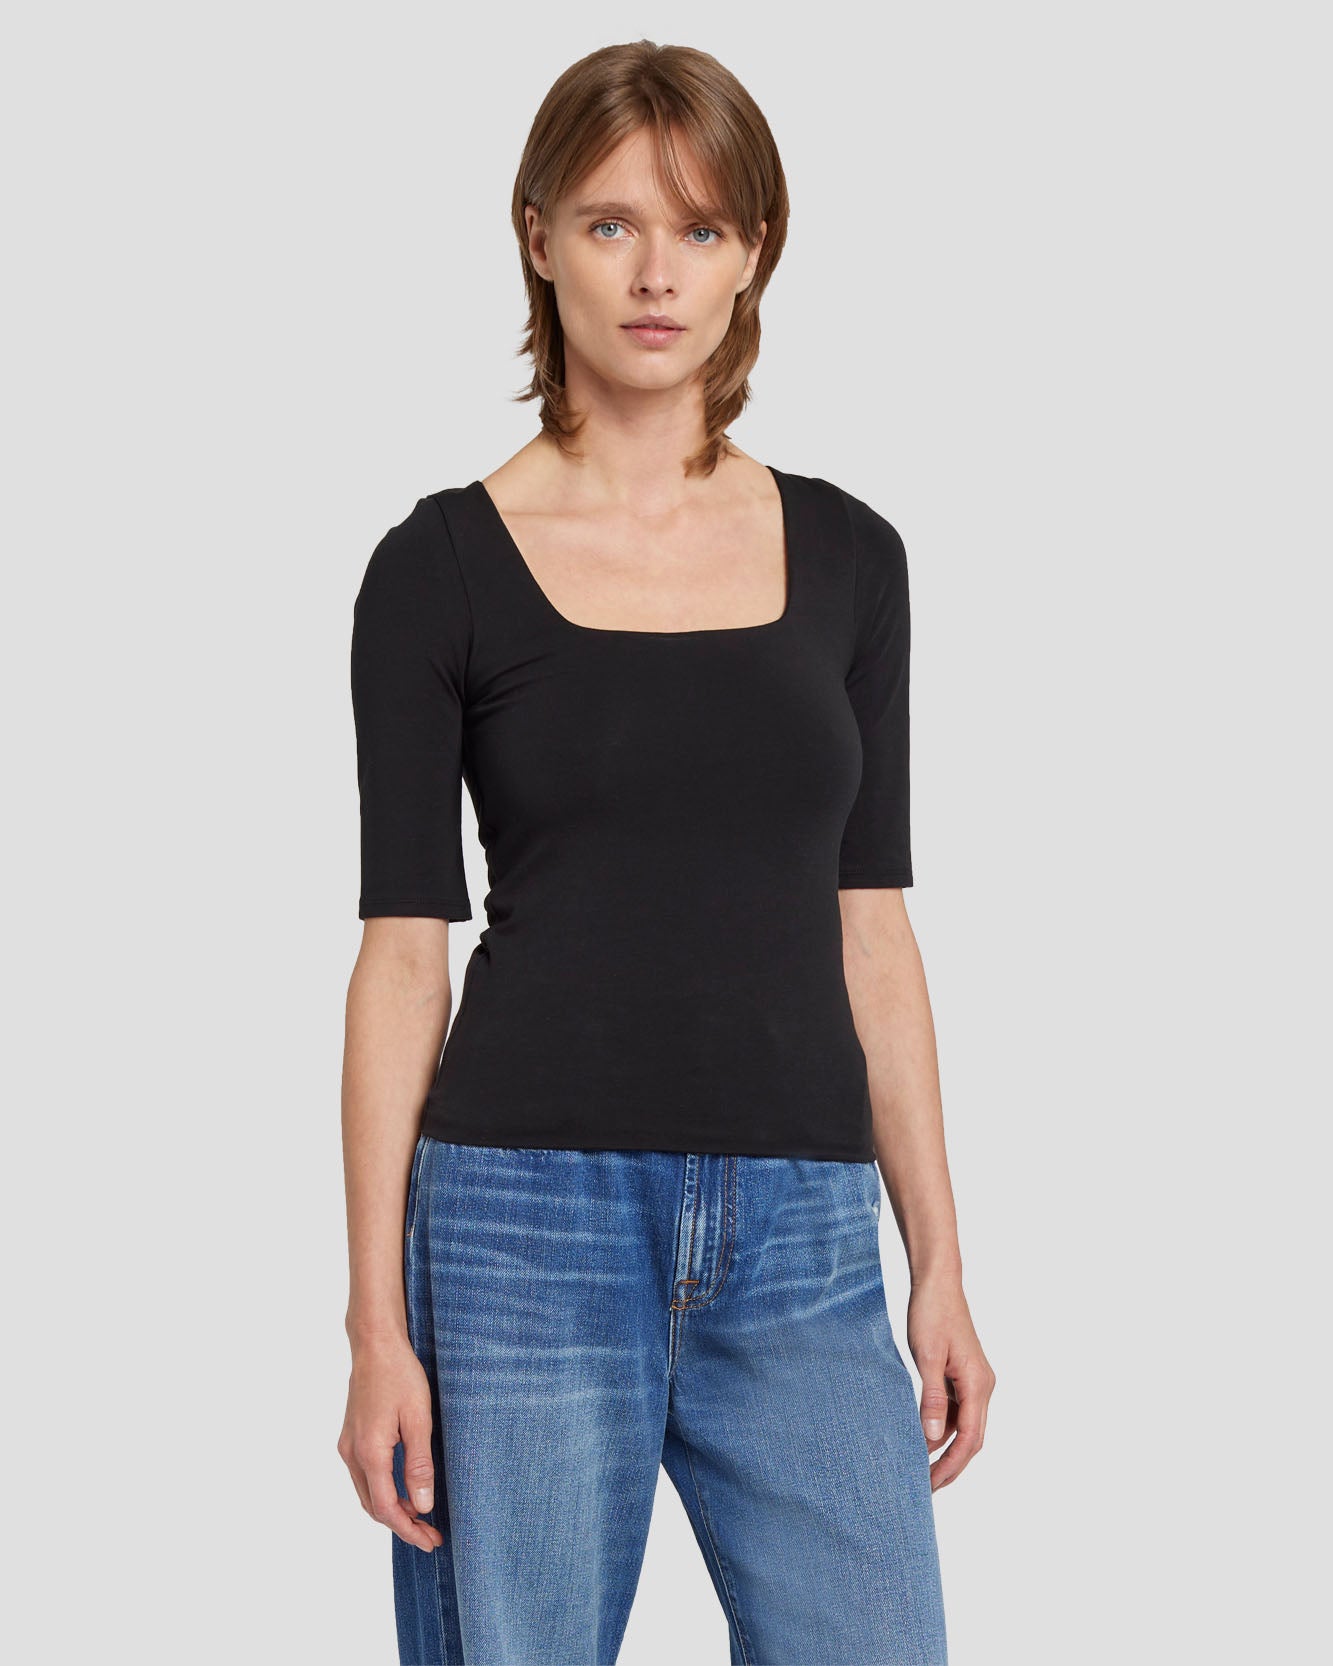 Square Neck Top in Black | 7 For All Mankind